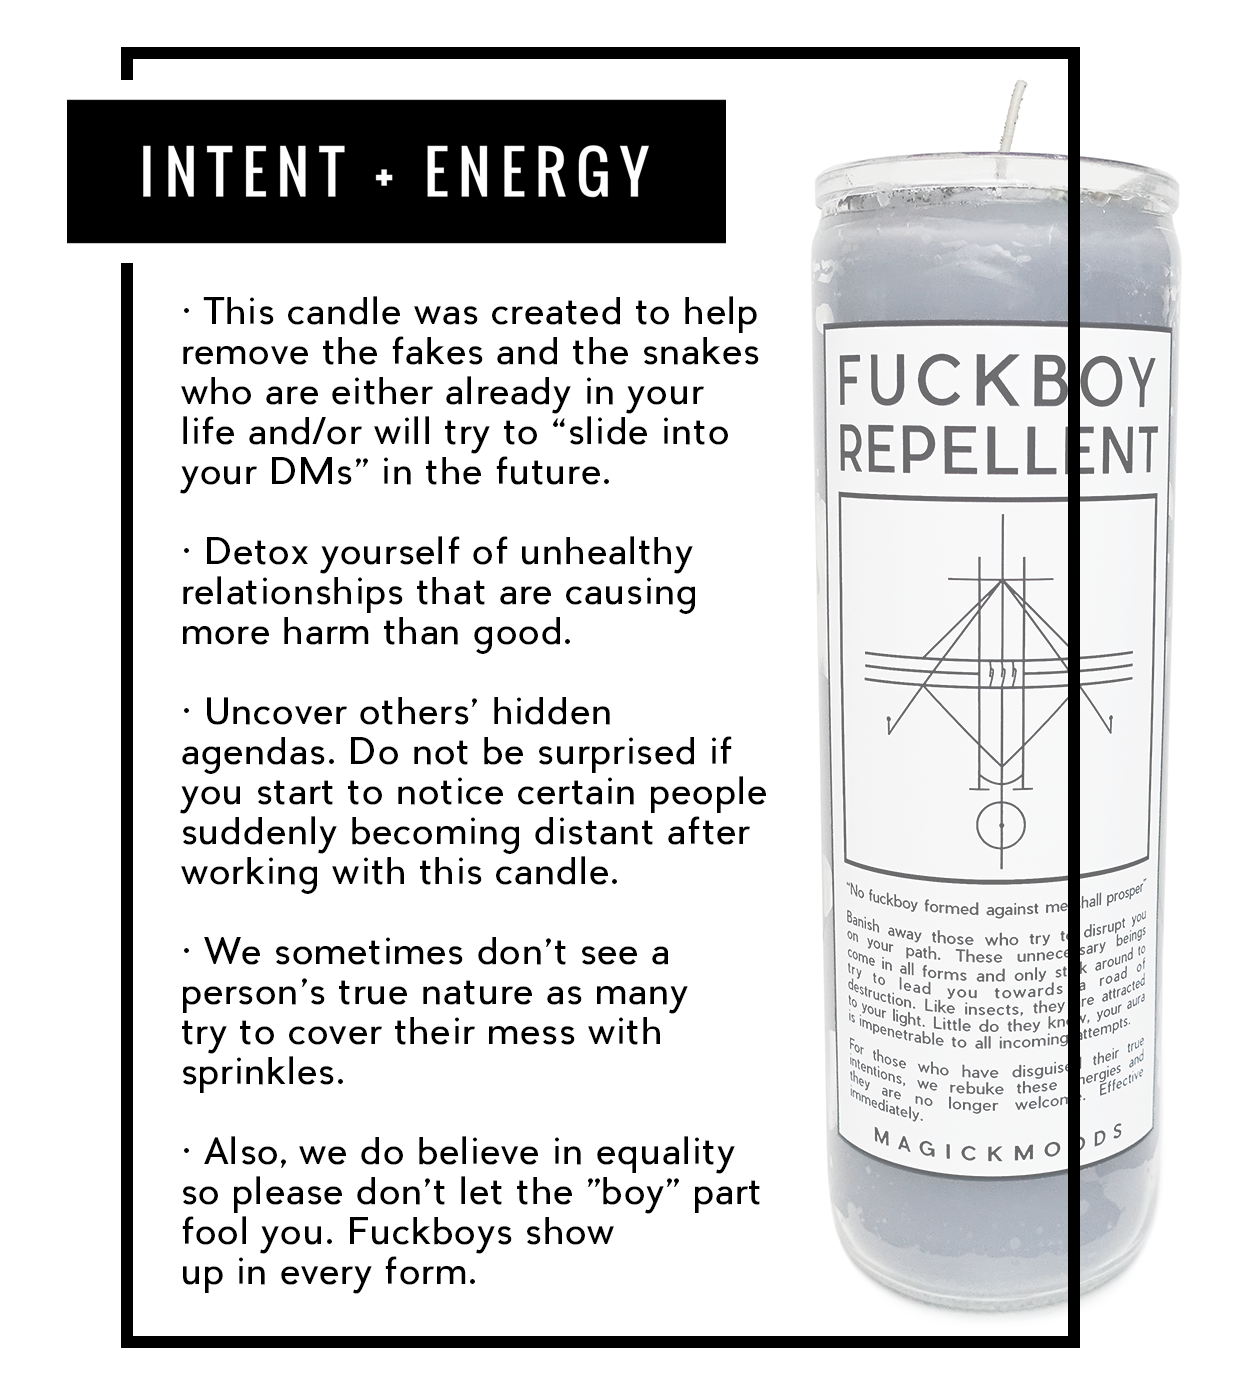 Fuckboy Repellent 7-Day Meditation Candle - PREORDER - Ships by July 28th, 2023